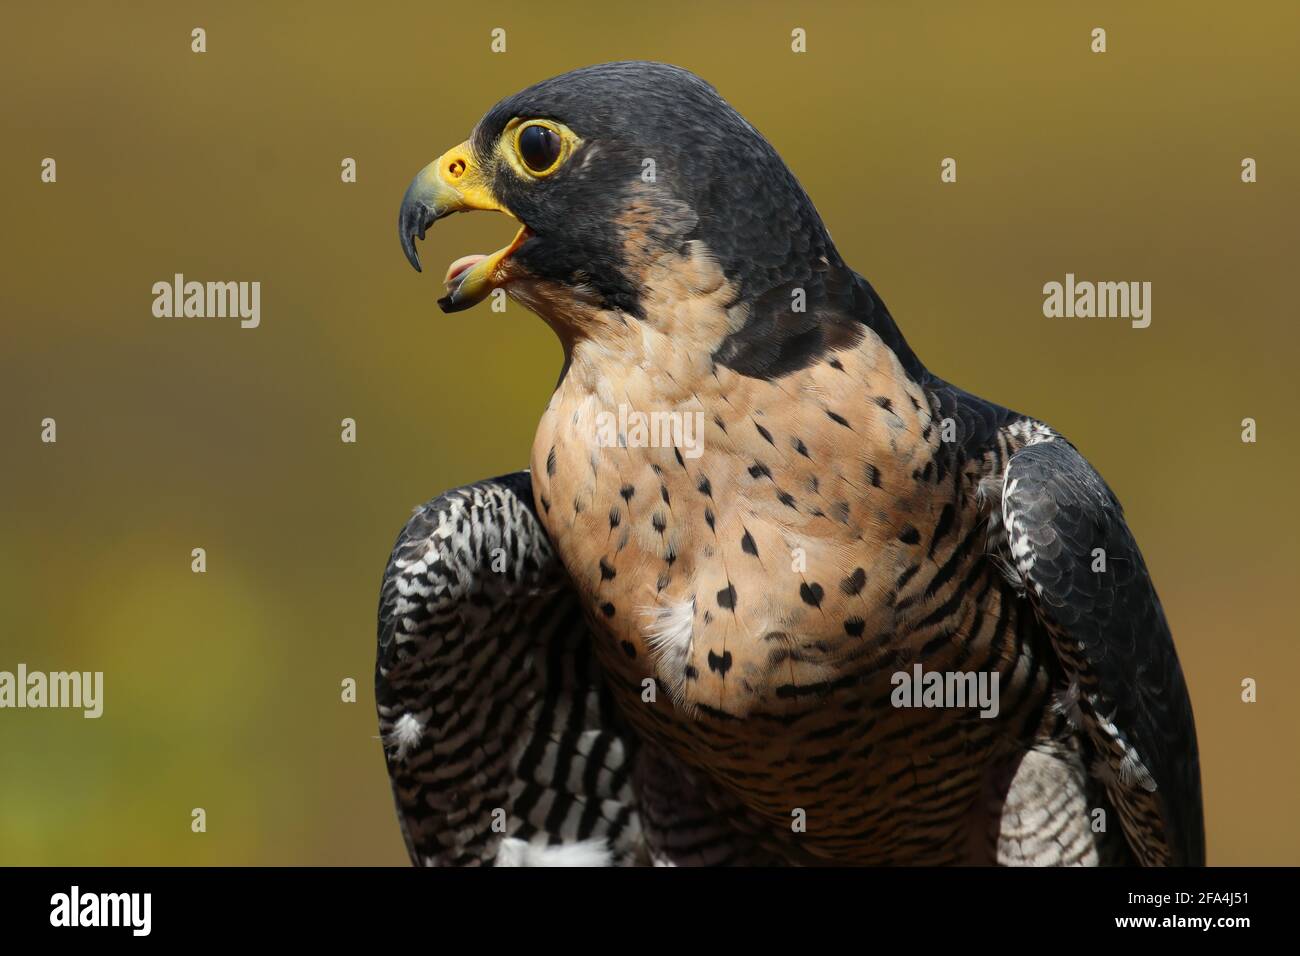 Peregrine Falcon outdoors calling with beak open close-up Stock Photo